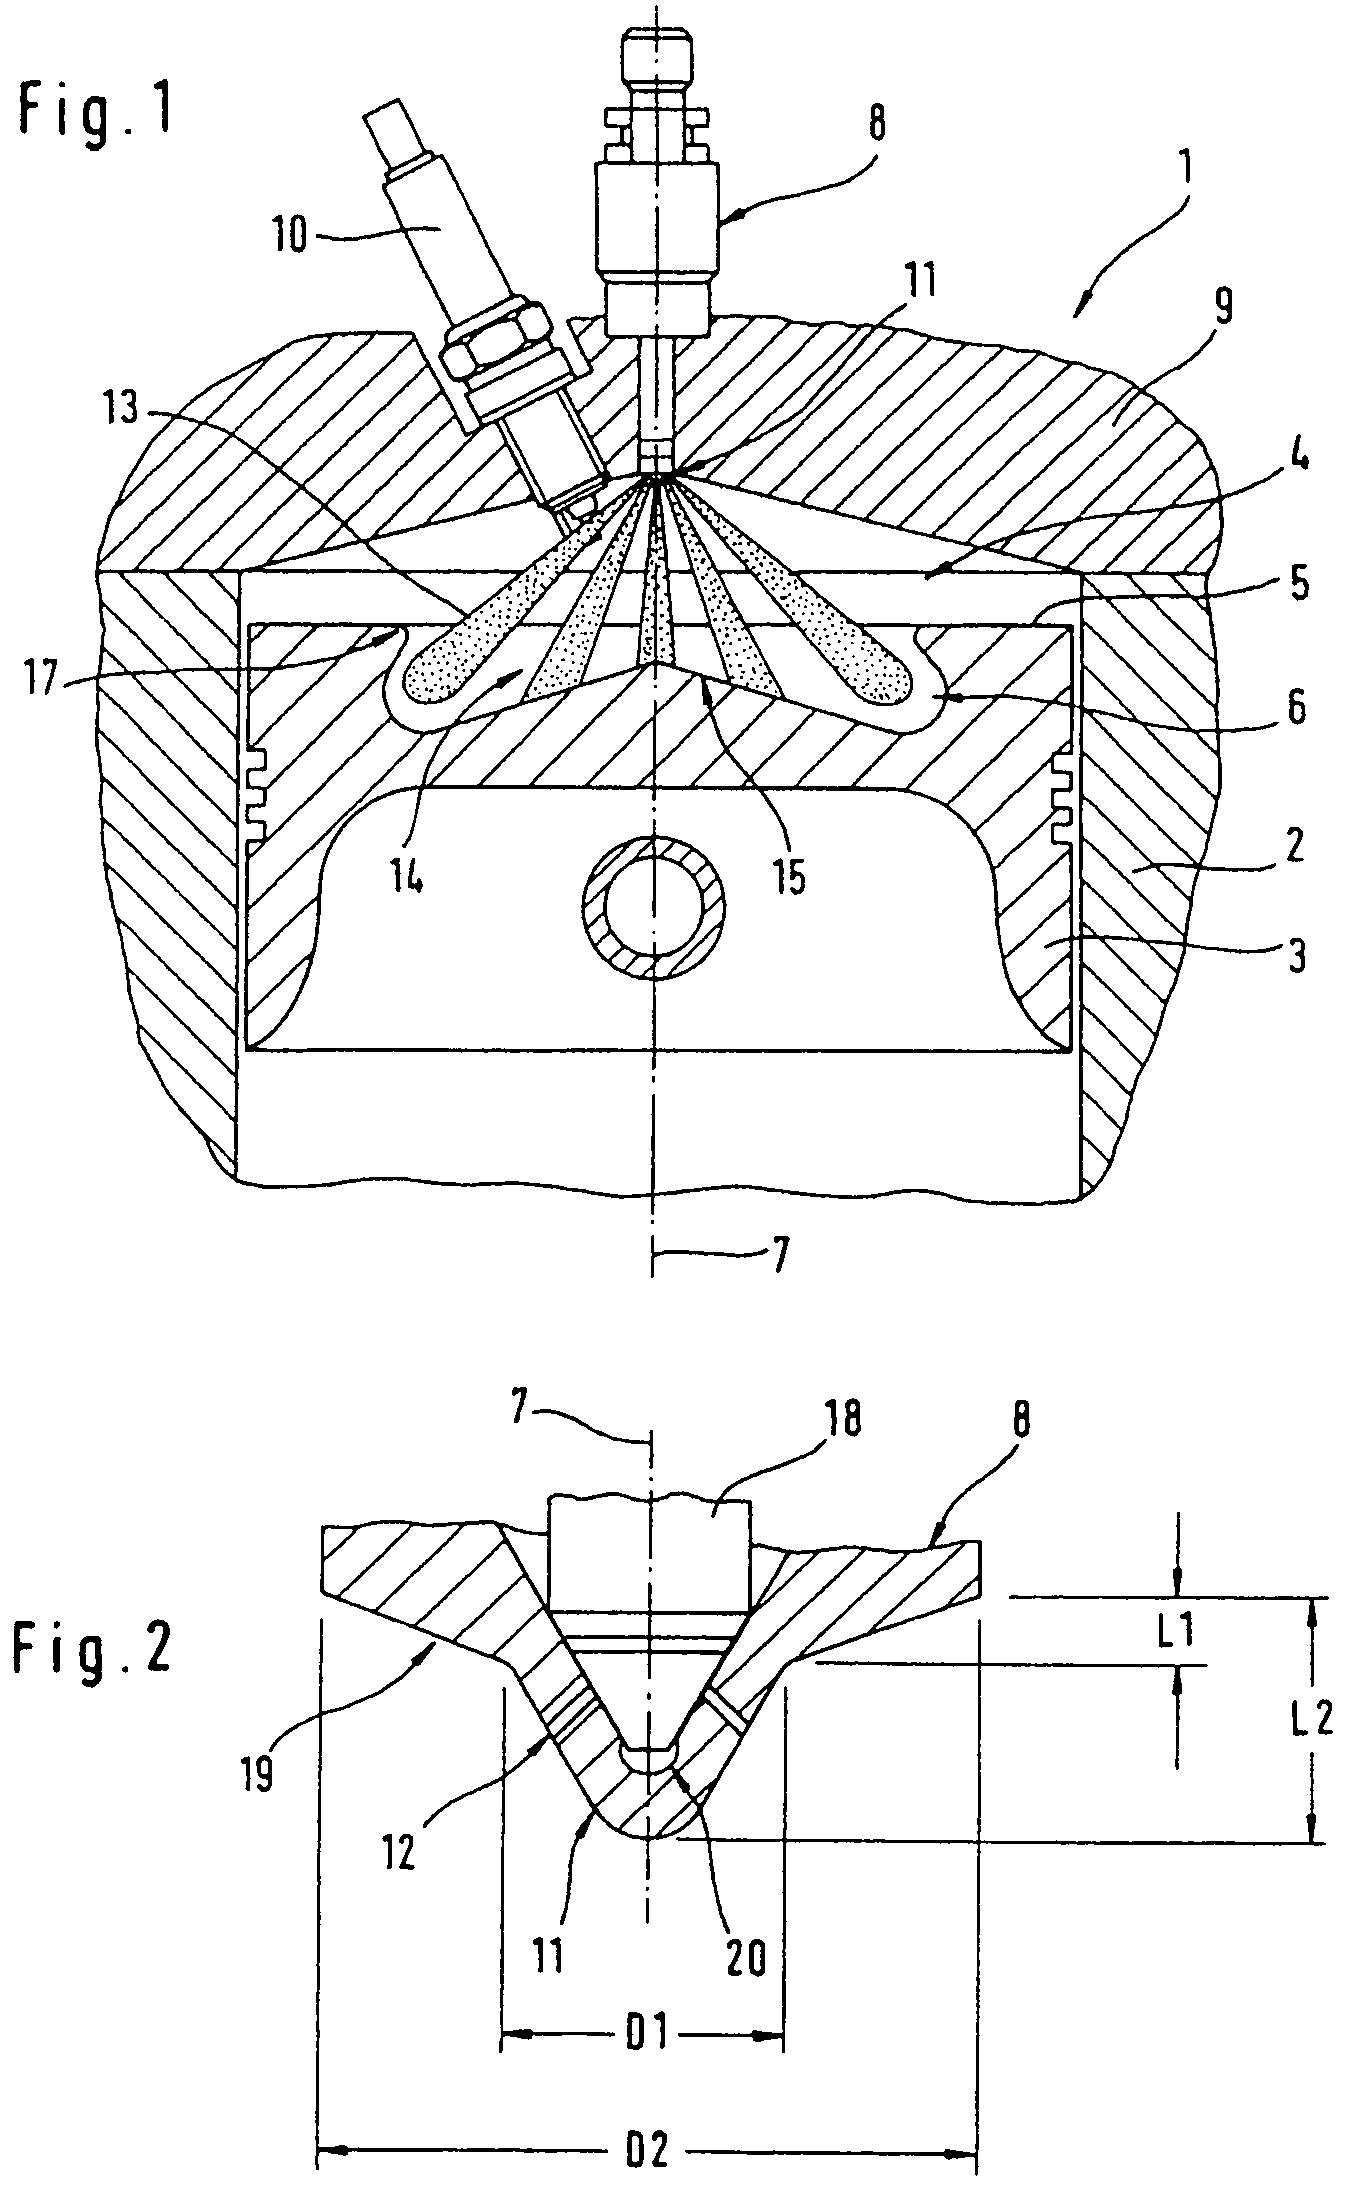 Direct-injection spark-ignition internal combustion engine